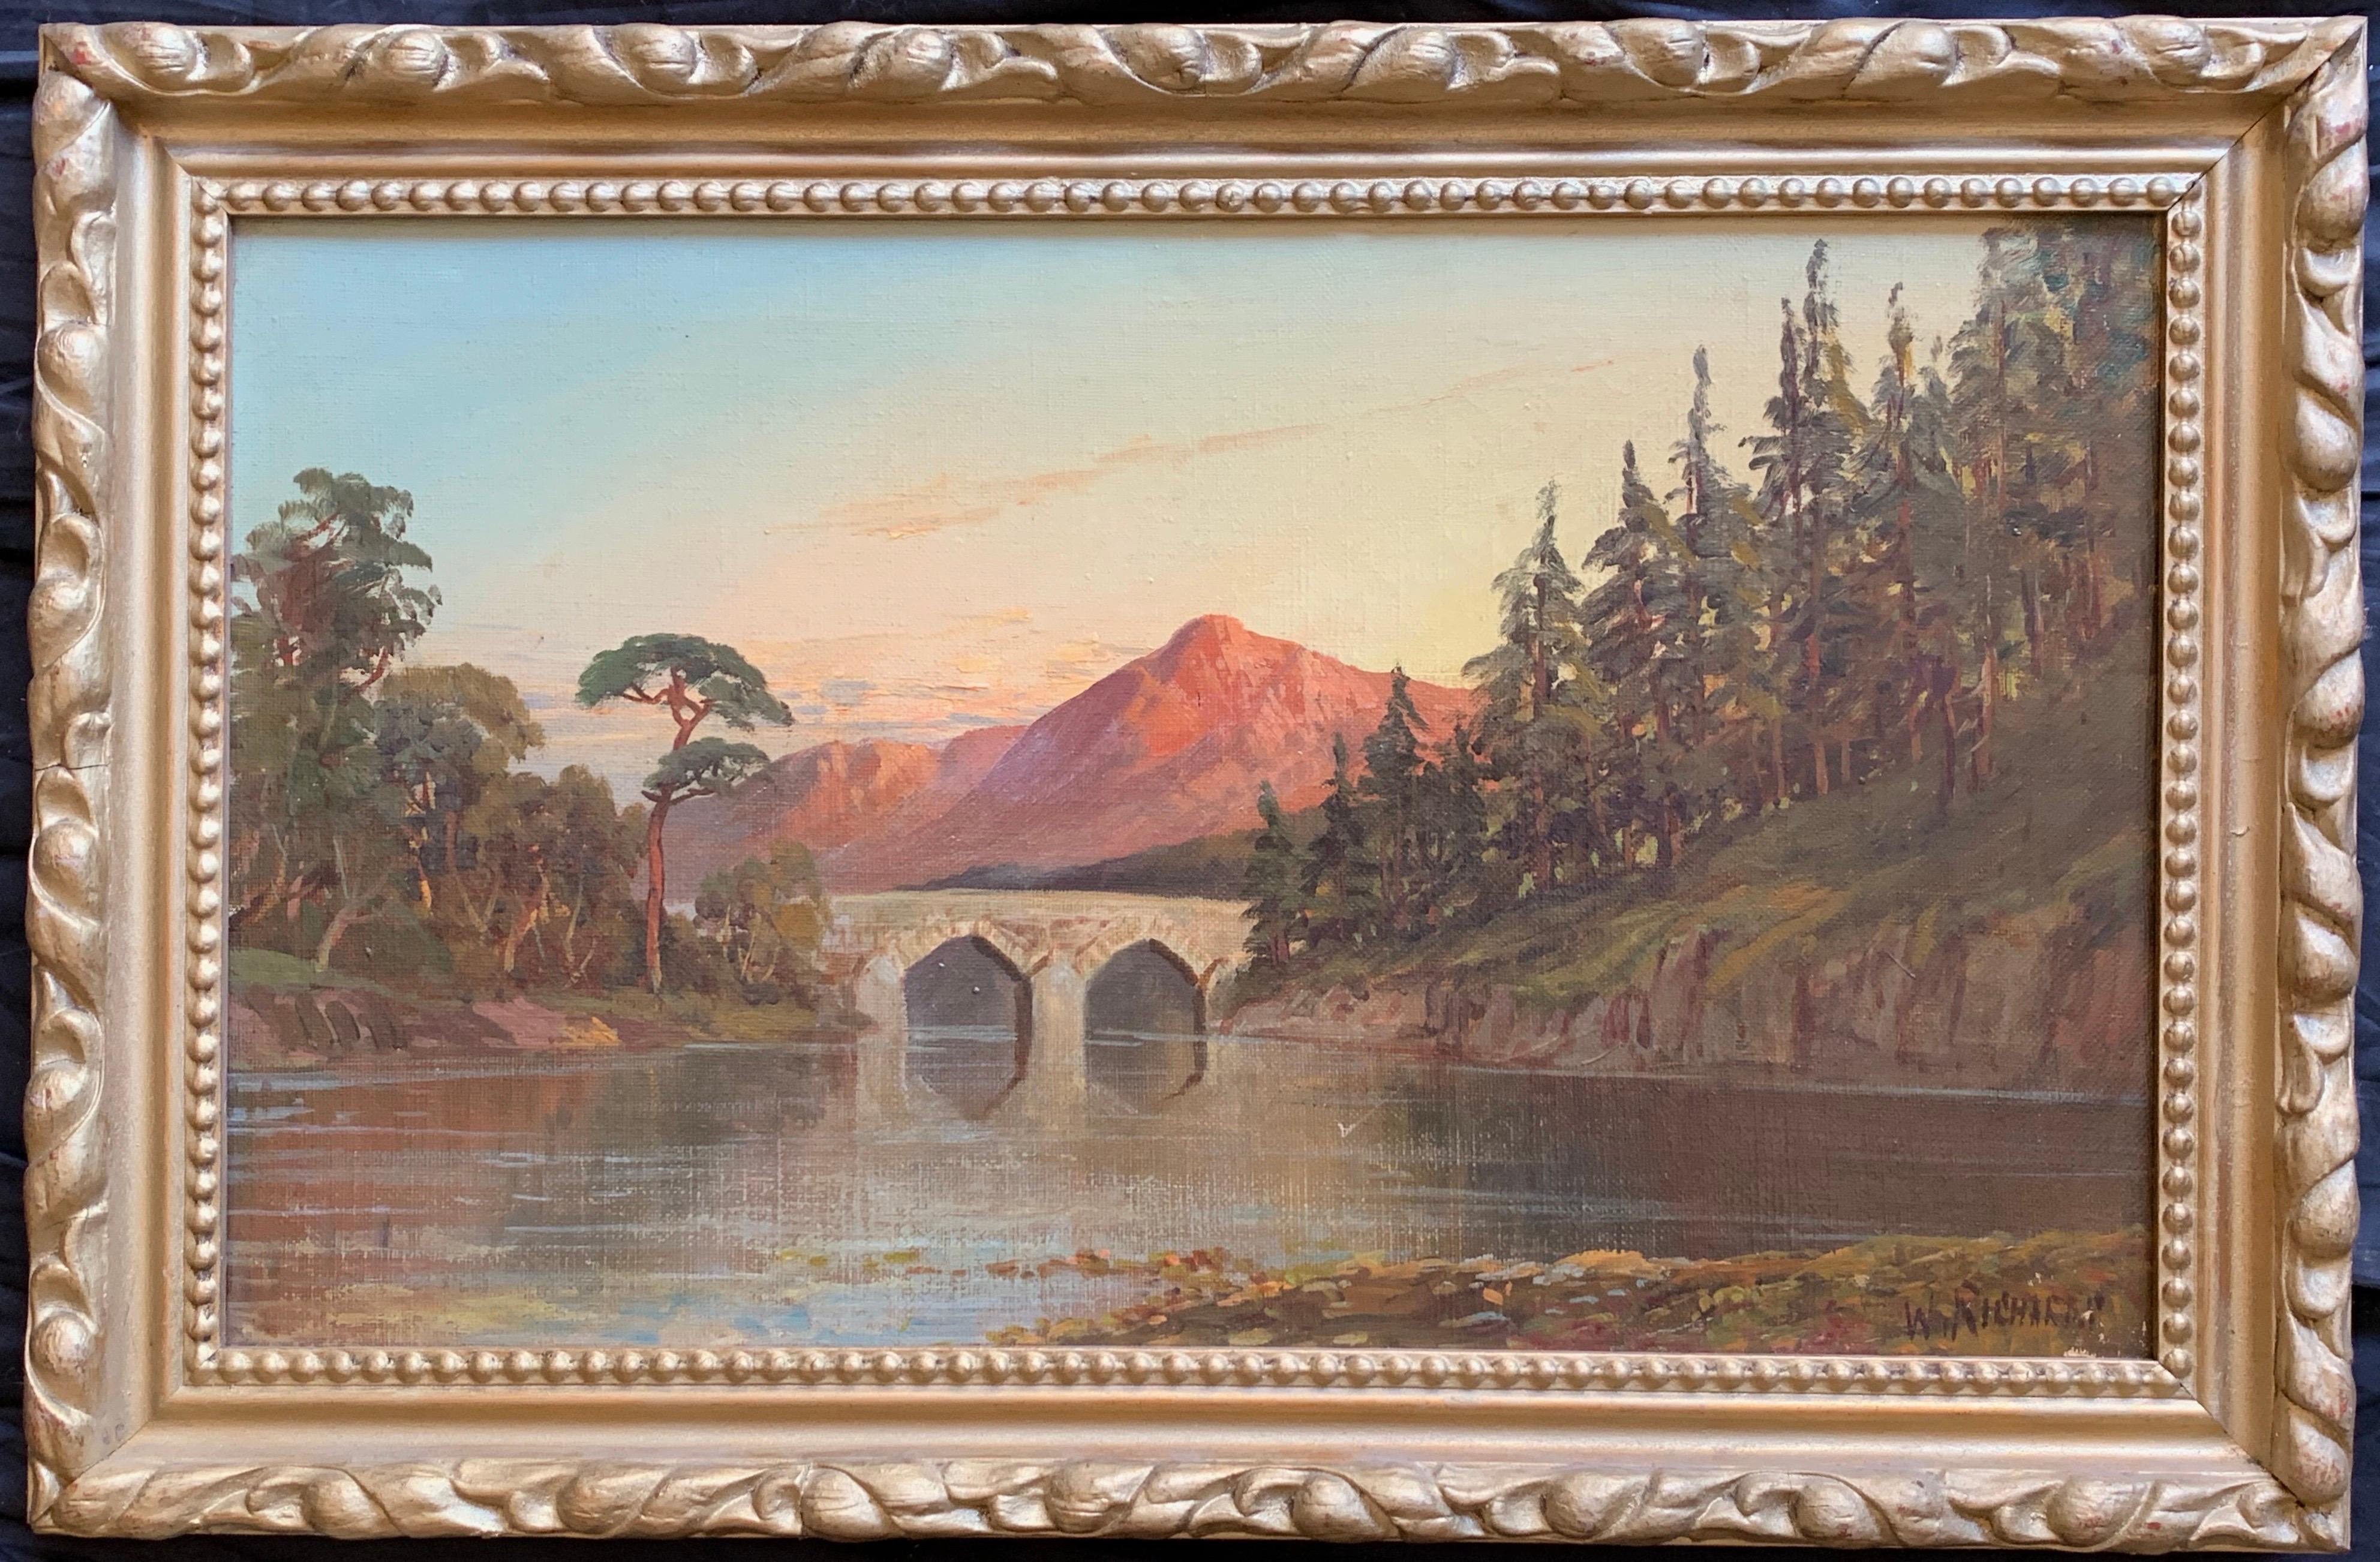 Francis E. Jamieson Landscape Painting - Antique Scottish Oil Painting Sunset Pitlochry Perthshire